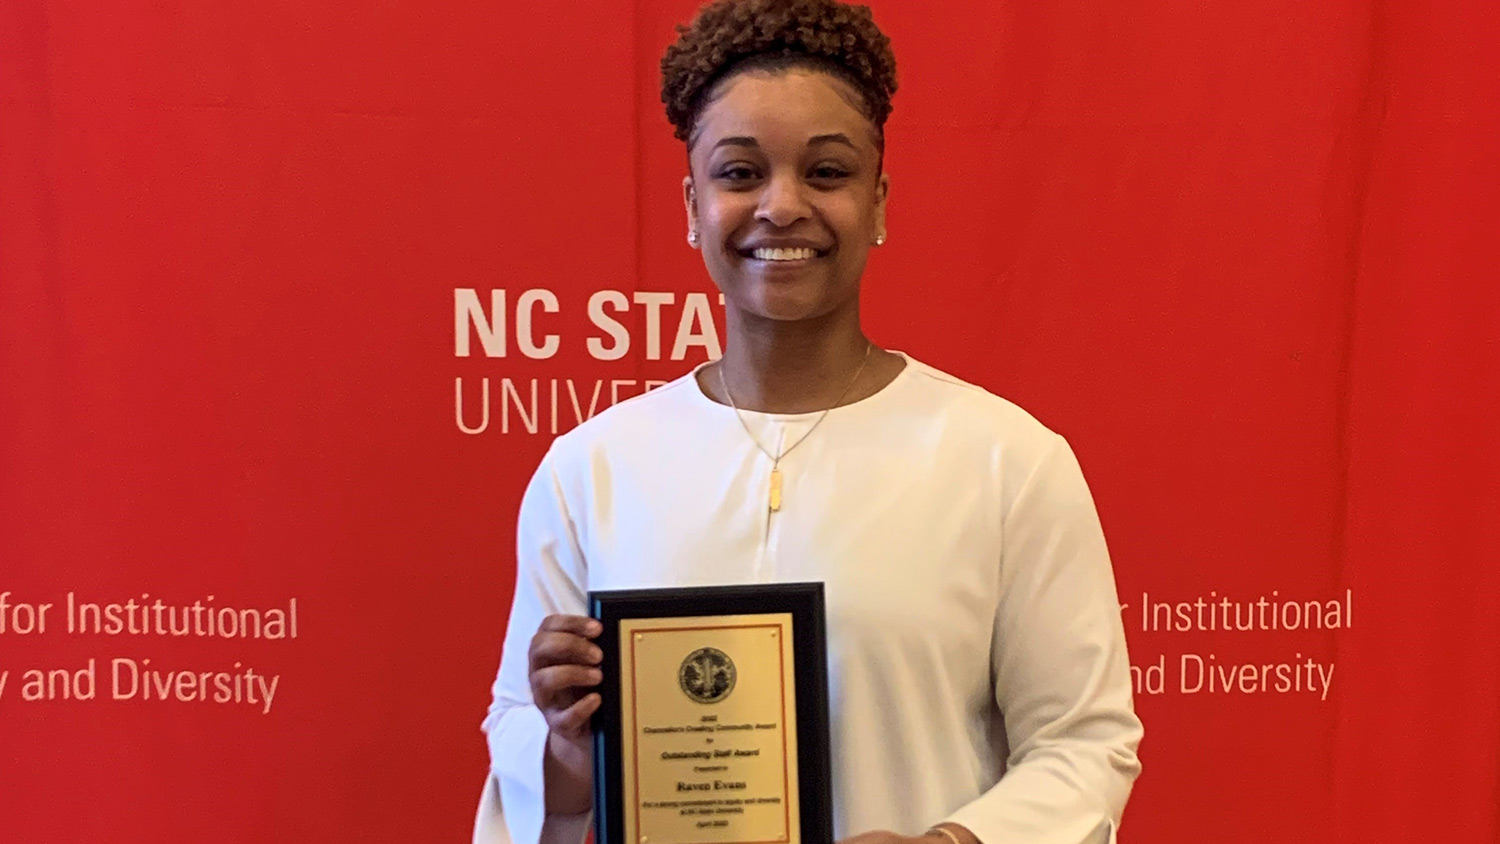 NC State staff member Raven Evans recently won the Office of Finance and Administration&rsquo;s Award for Excellence in Human Relations and the&nbsp;Chancellor&rsquo;s Creating Community Award&nbsp;for Outstanding Staff.